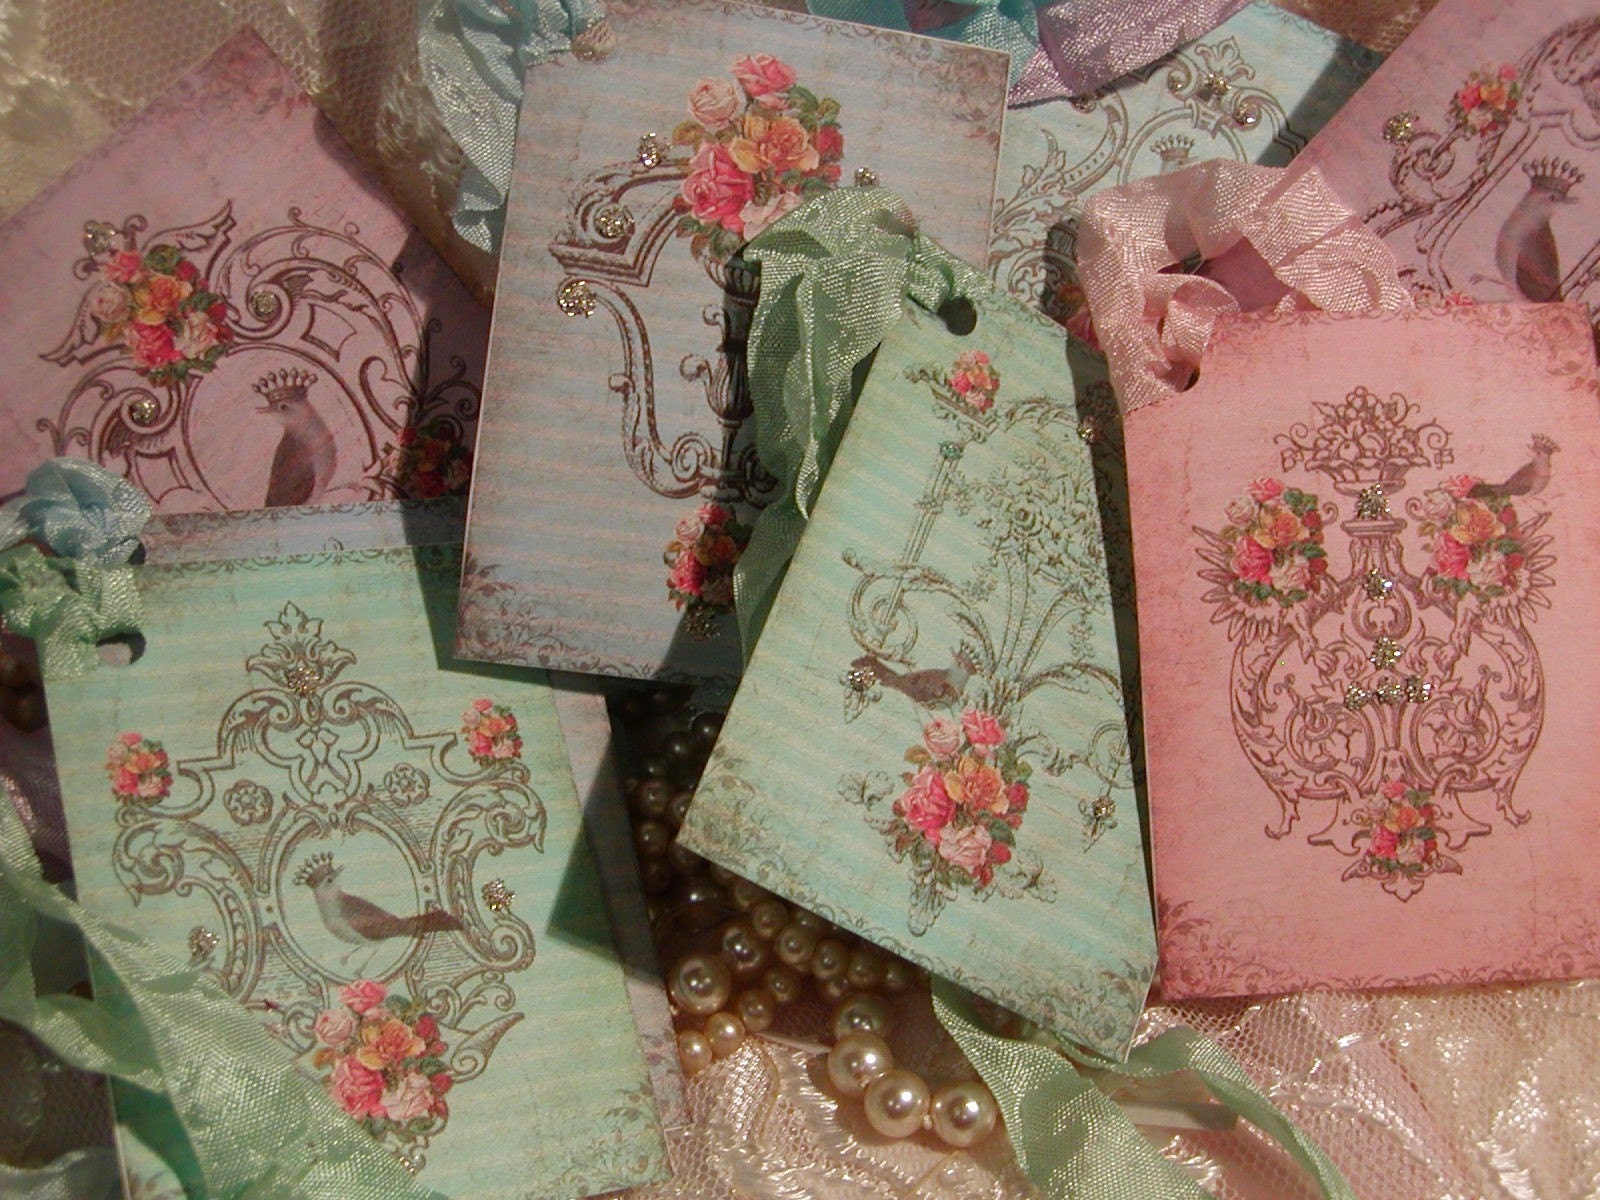 Treasury Item - French Inspired Gift Tags -  Bird with Royal Crown on all the cards - Easter Gift Tags - Mothers Day Gift Tags  - All Occasion - Parsian - Paris Apartment - French Market  - Set of 8